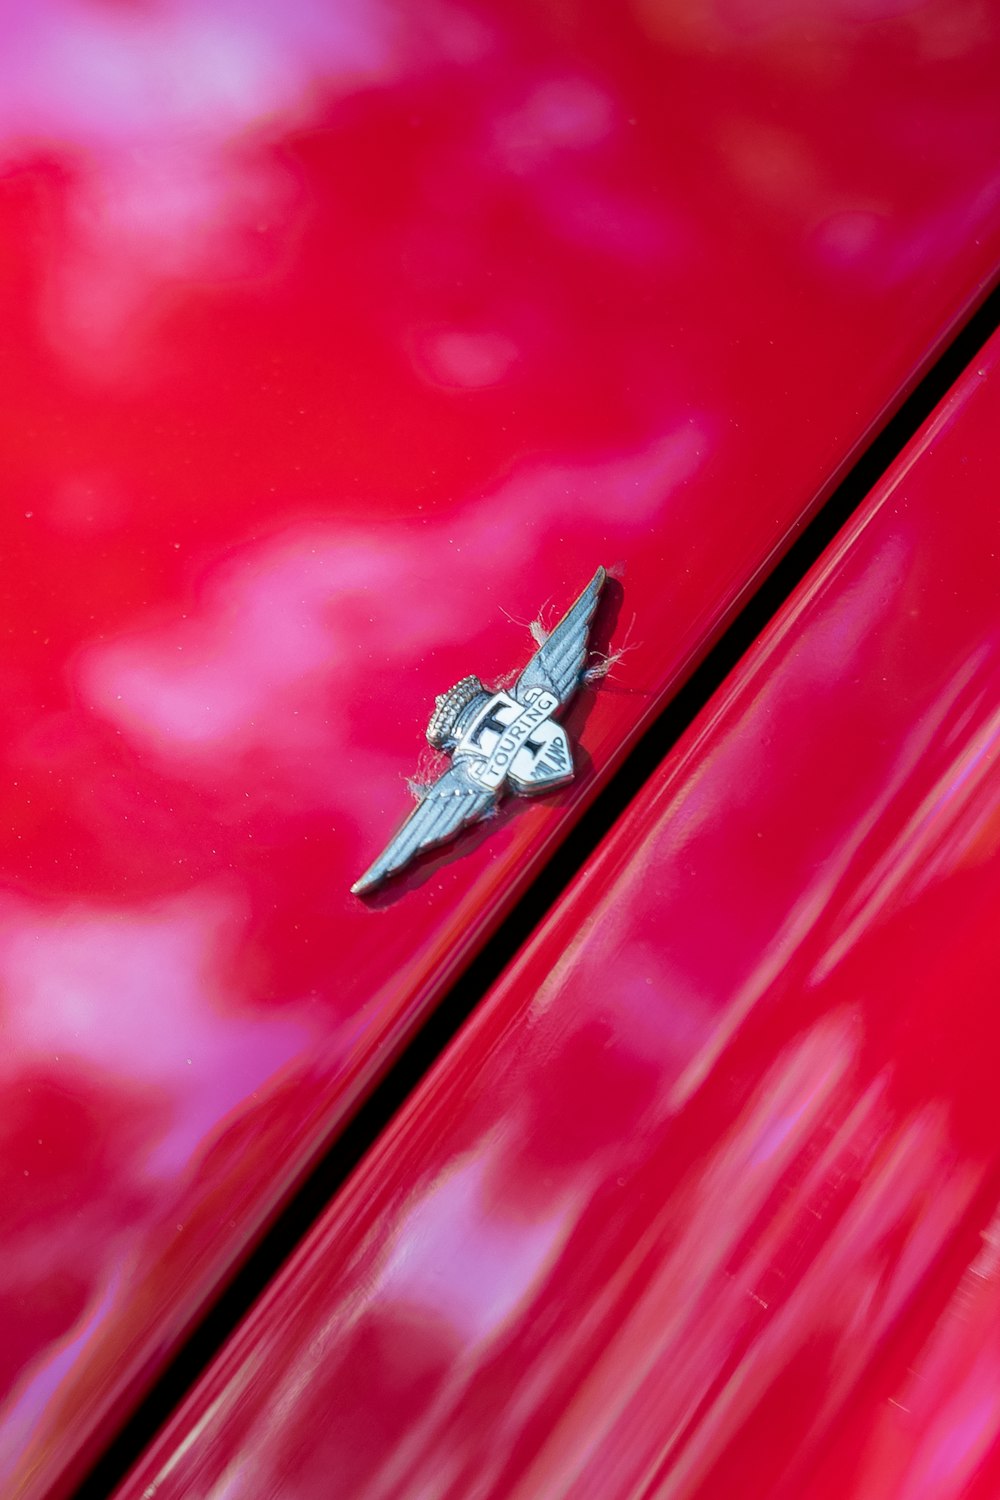 a close up of the hood ornament on a red car